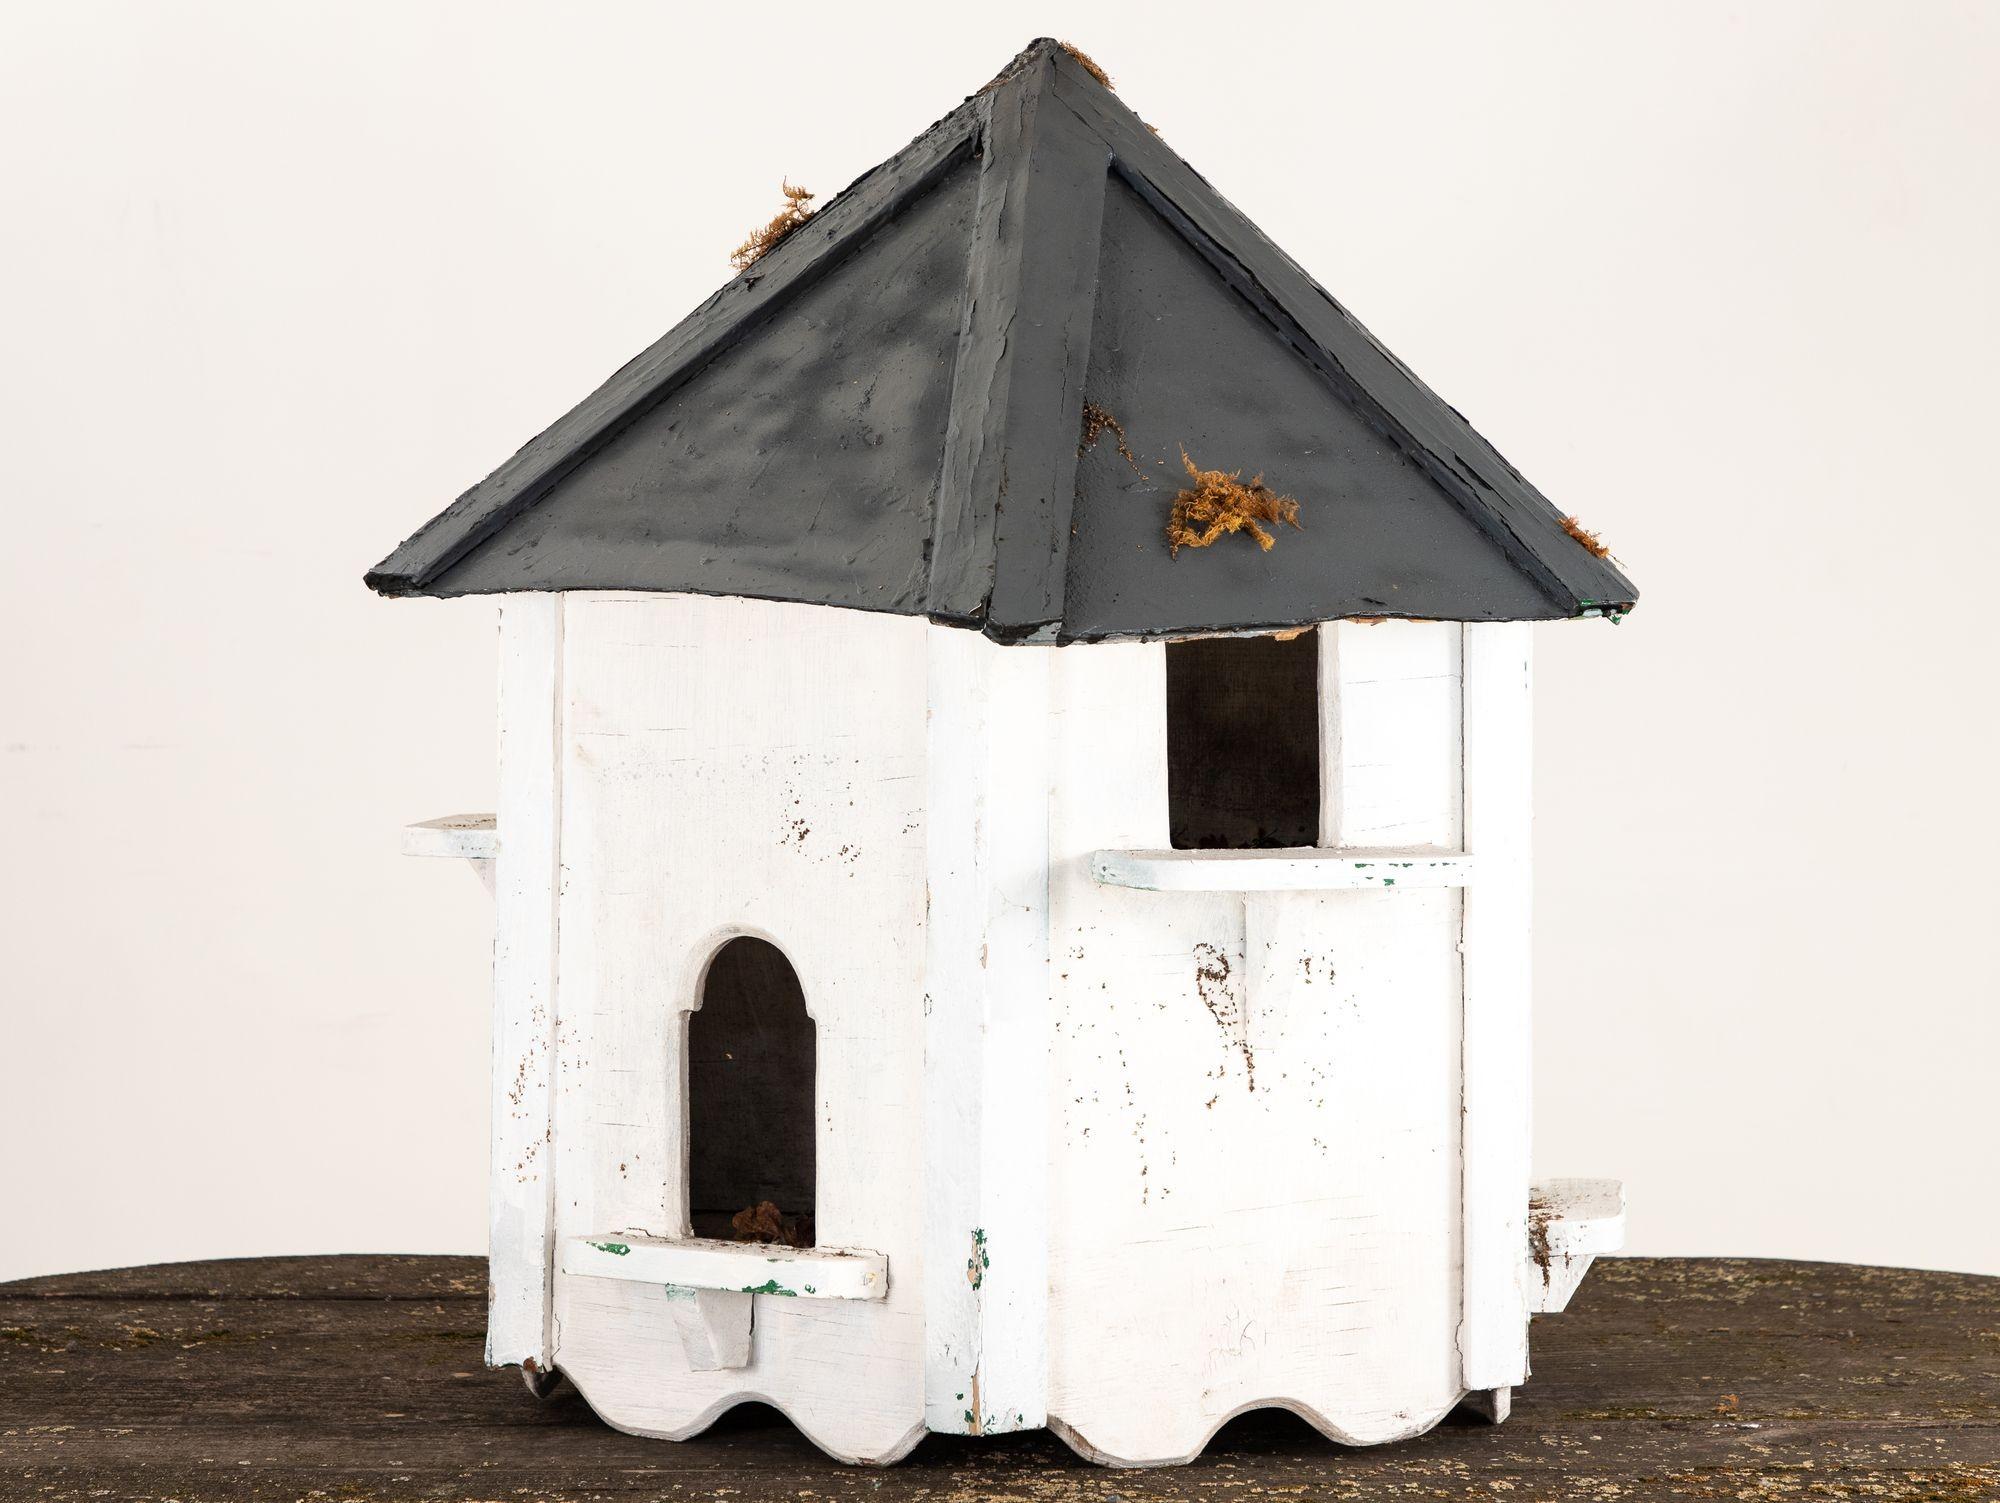 This is a large English country six-sided dovecote from the early 21st c. It is resplendent in weathered white paint, exuding rustic allure. Standing tall, it boasts six pigeonholes of varying heights, creating a staggered visual symphony. Each